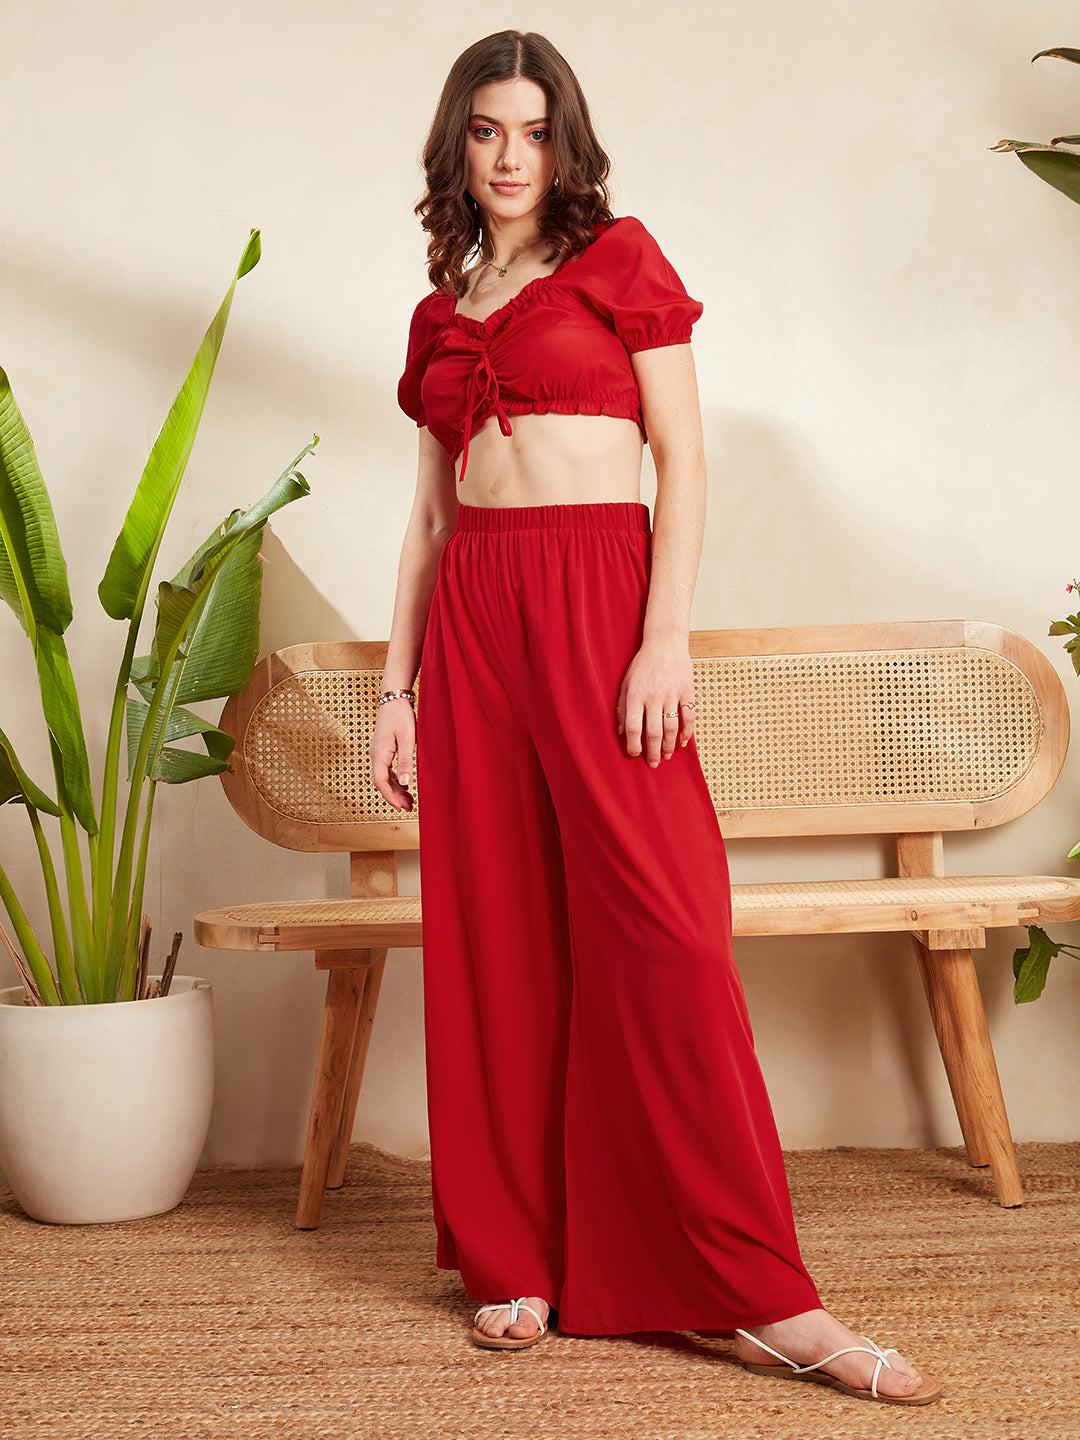 Buy High Waist Trousers, Wide Leg Pants, Red Wide Leg Pants, Palazzo Pants  for Women, Women Pants With Pockets, Office Pants Women, Elegant Pant  Online in India - Etsy